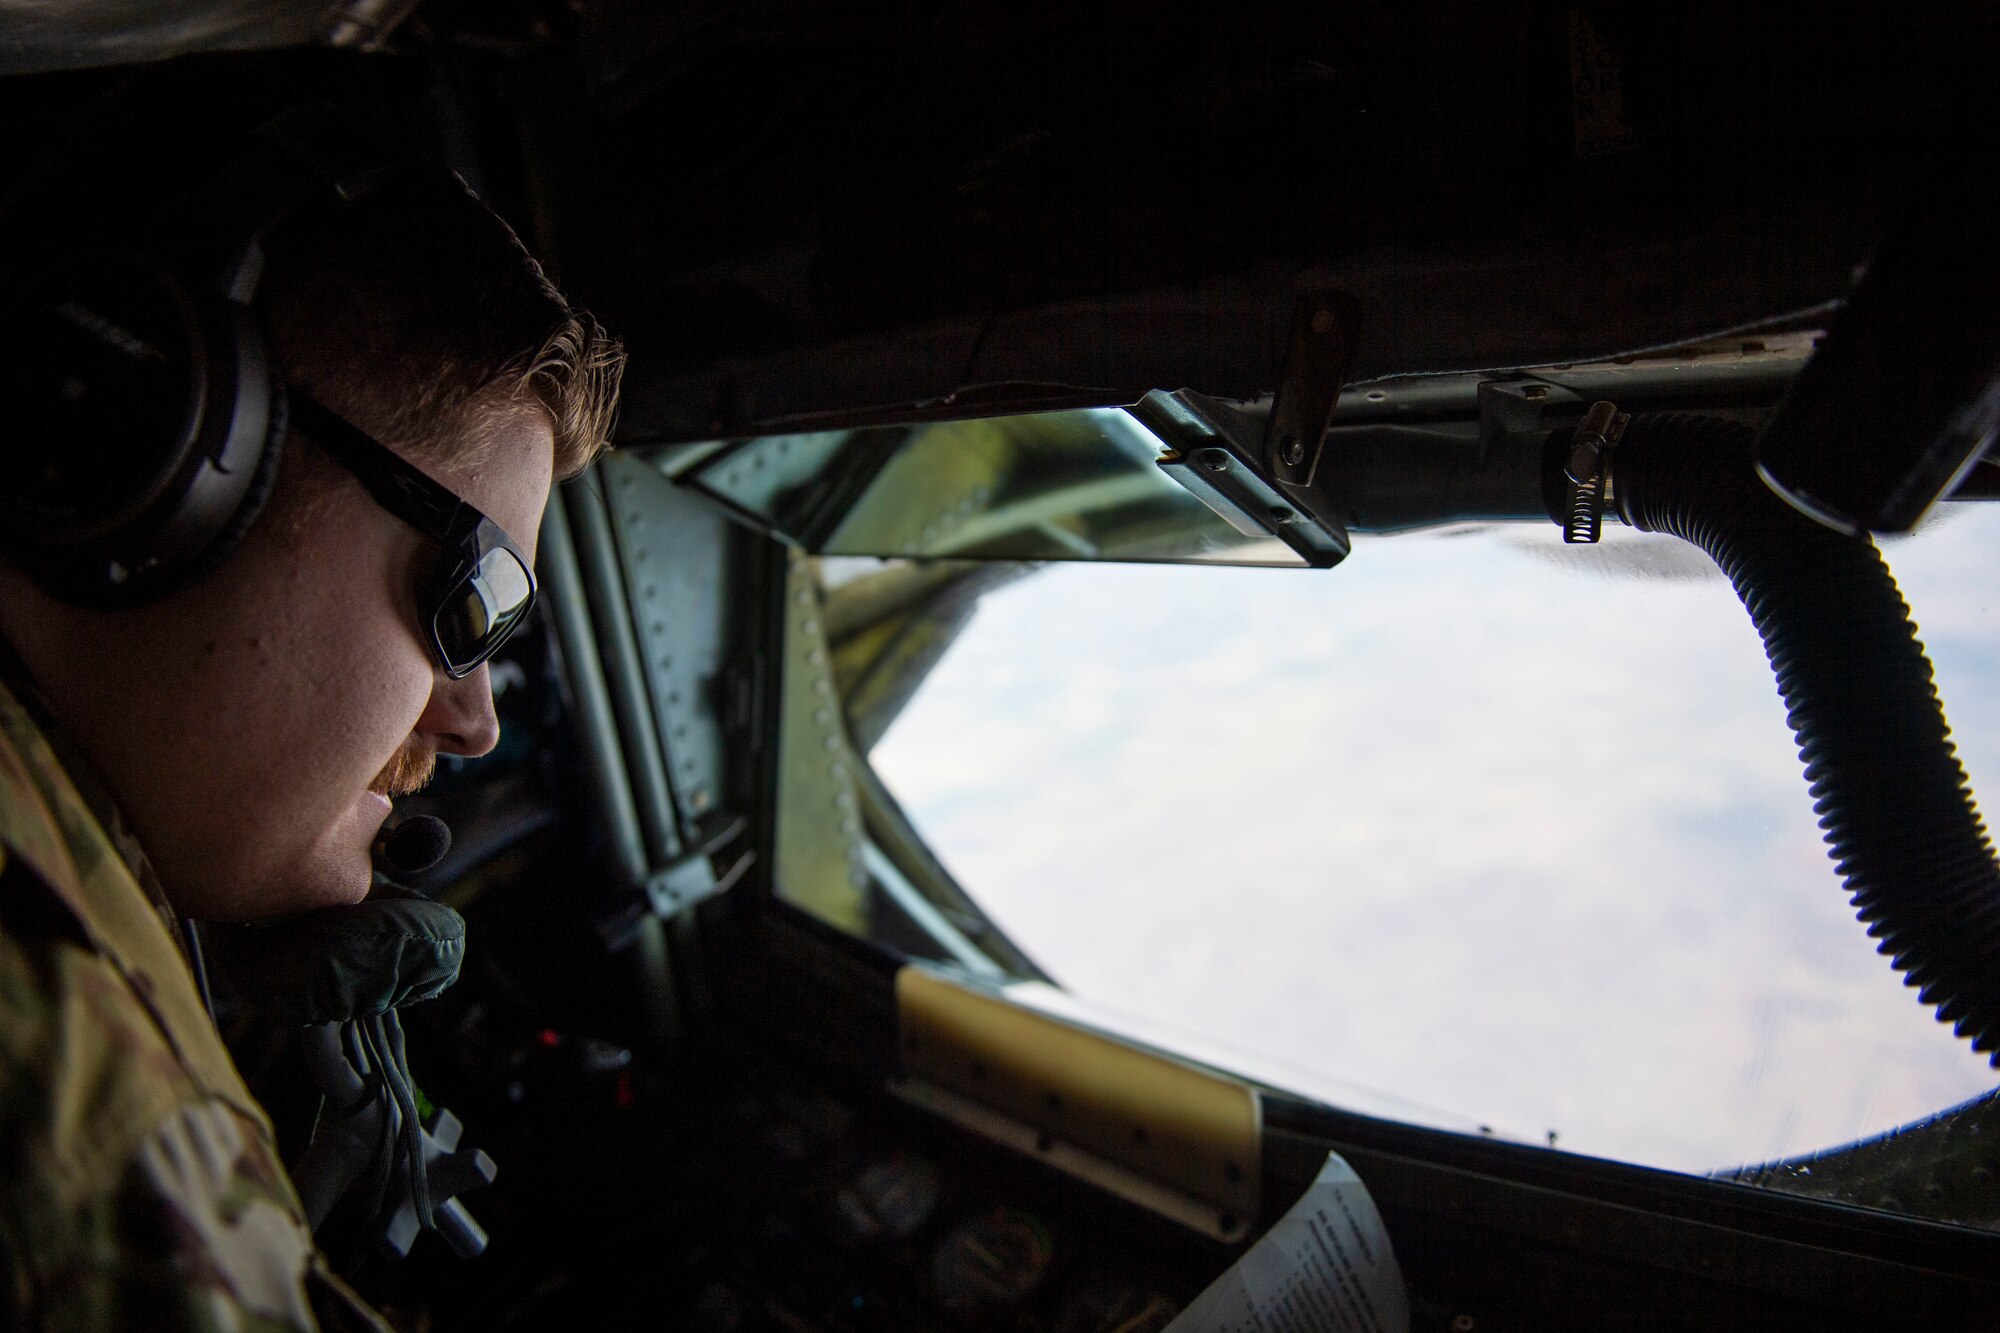 U.S. Air Force Senior Airman Dillon Tucker, a boom operator assigned to the 91st Air Refueling Squadron, prepares to refuel an aircraft over New Mexico, Feb. 22, 2022.